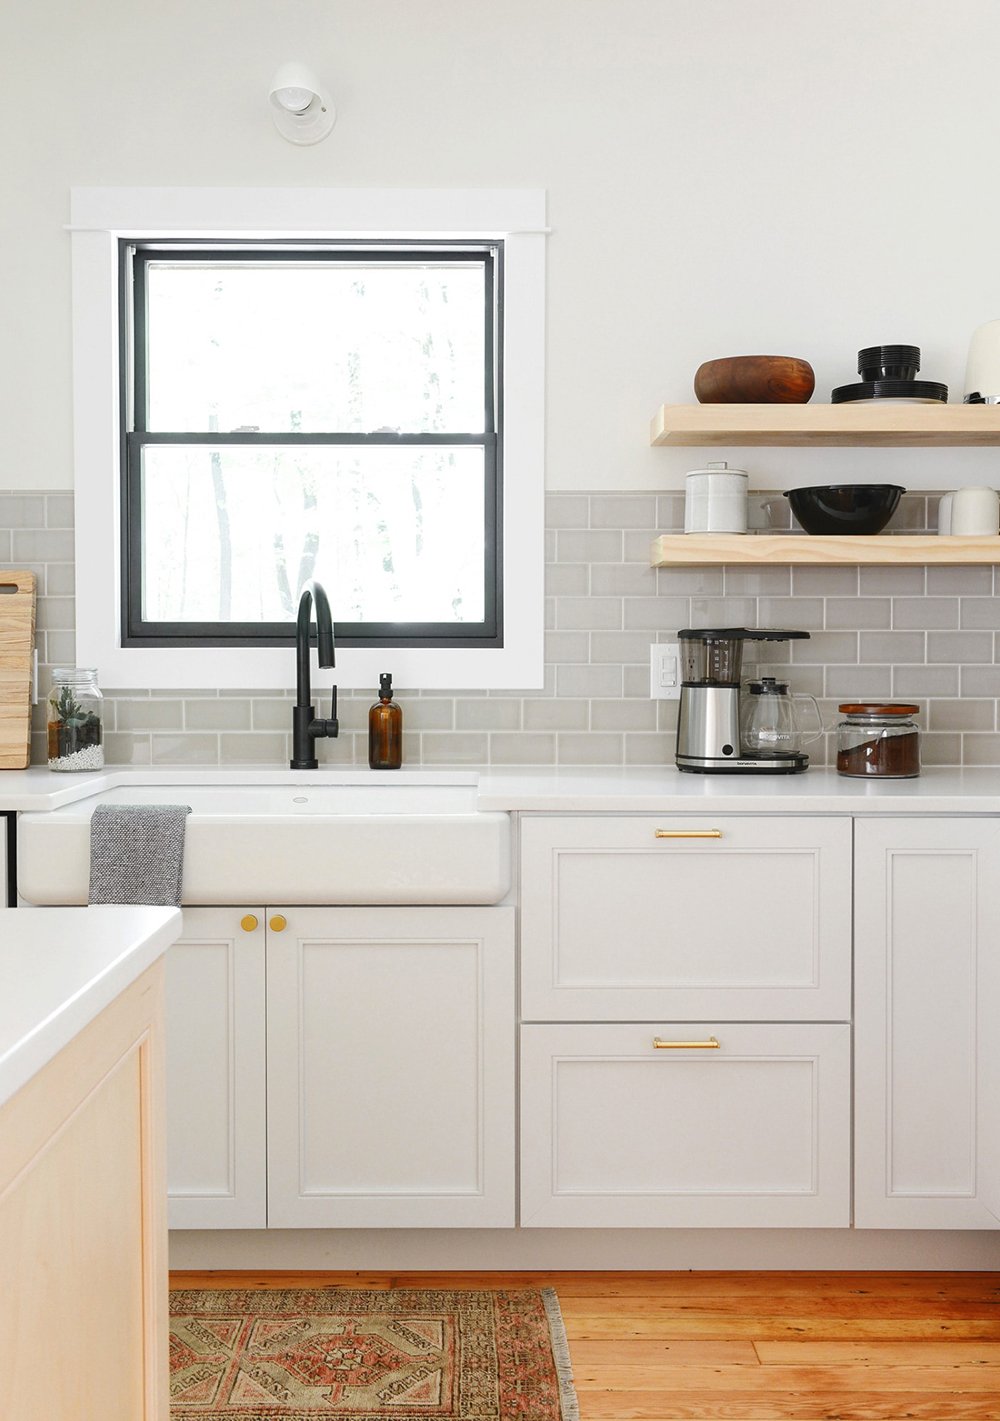 How to Make Subway Tile Look Classic and Not Basic - roomfortuesday.com